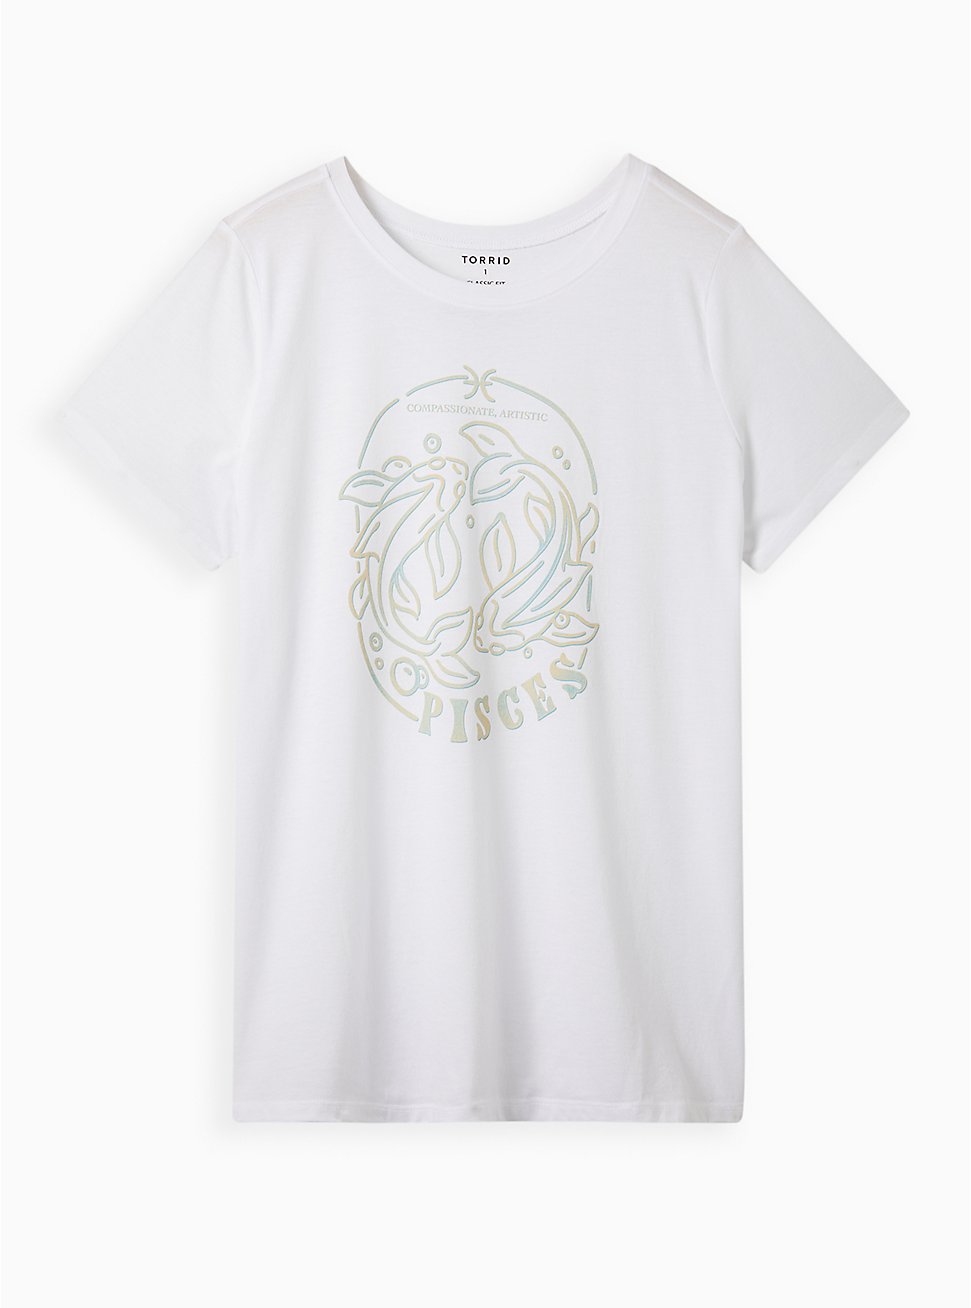 Plus Size Everyday Tee - Signature Jersey Astrology Pisces White, BRIGHT WHITE, hi-res